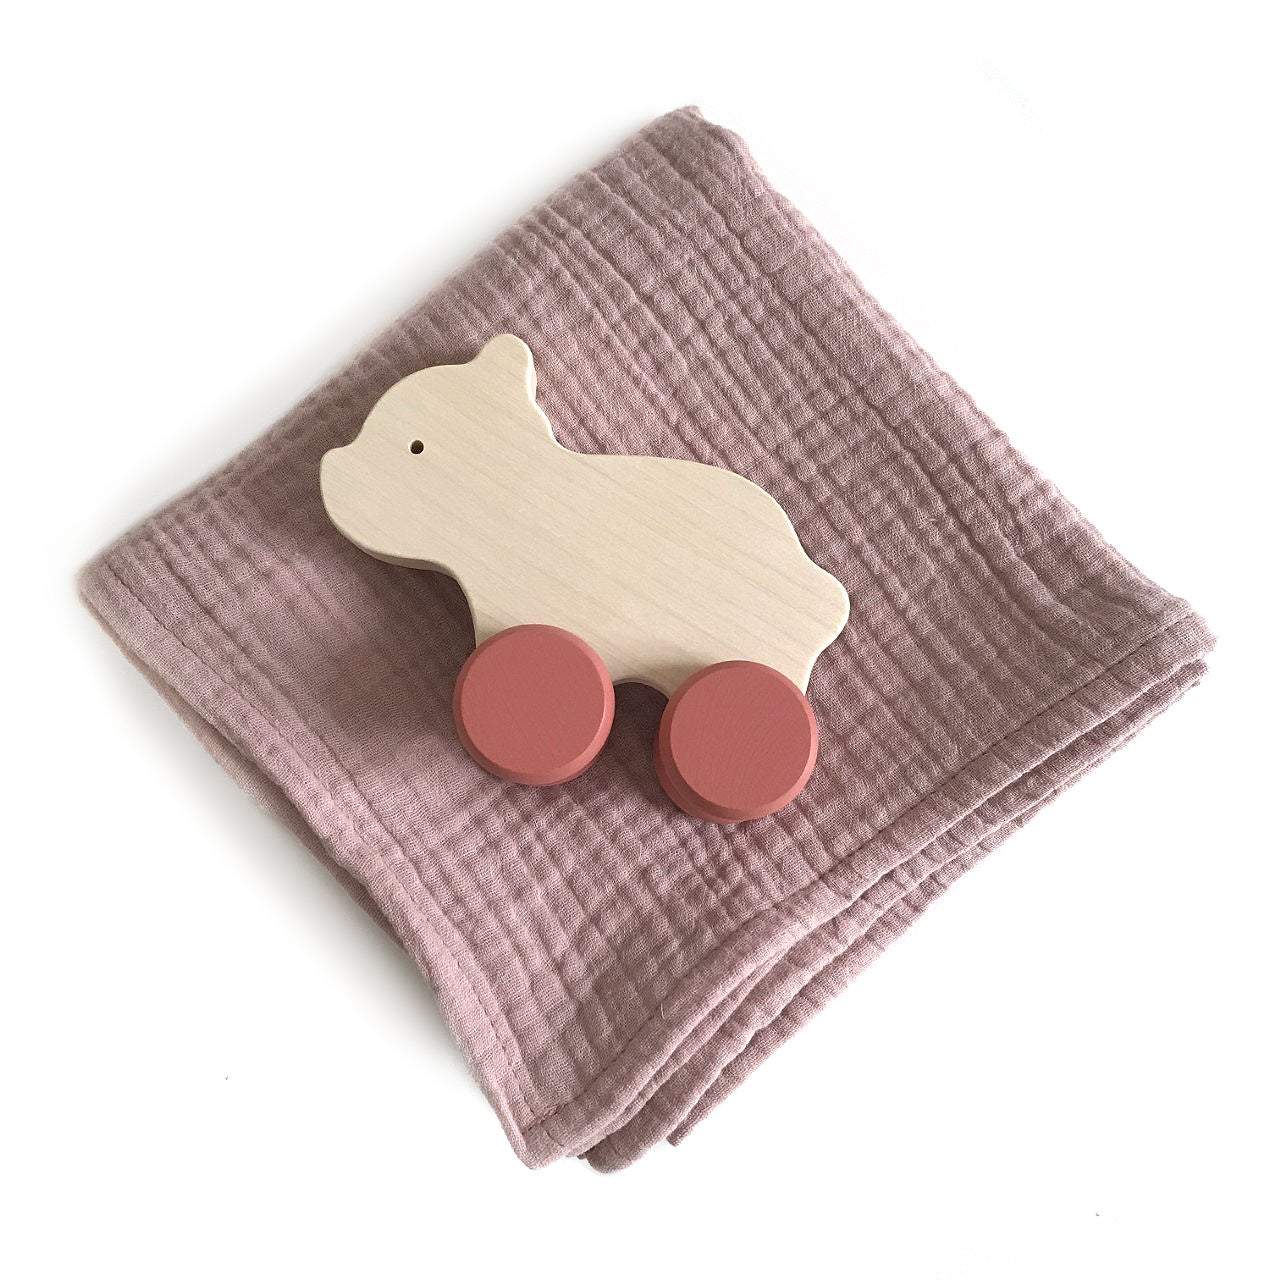 A beautiful set with handmade wooden bear with red wheels push toy. Also comes with a pink swaddle blanket. All wrapped up in a beautiful craft box.  